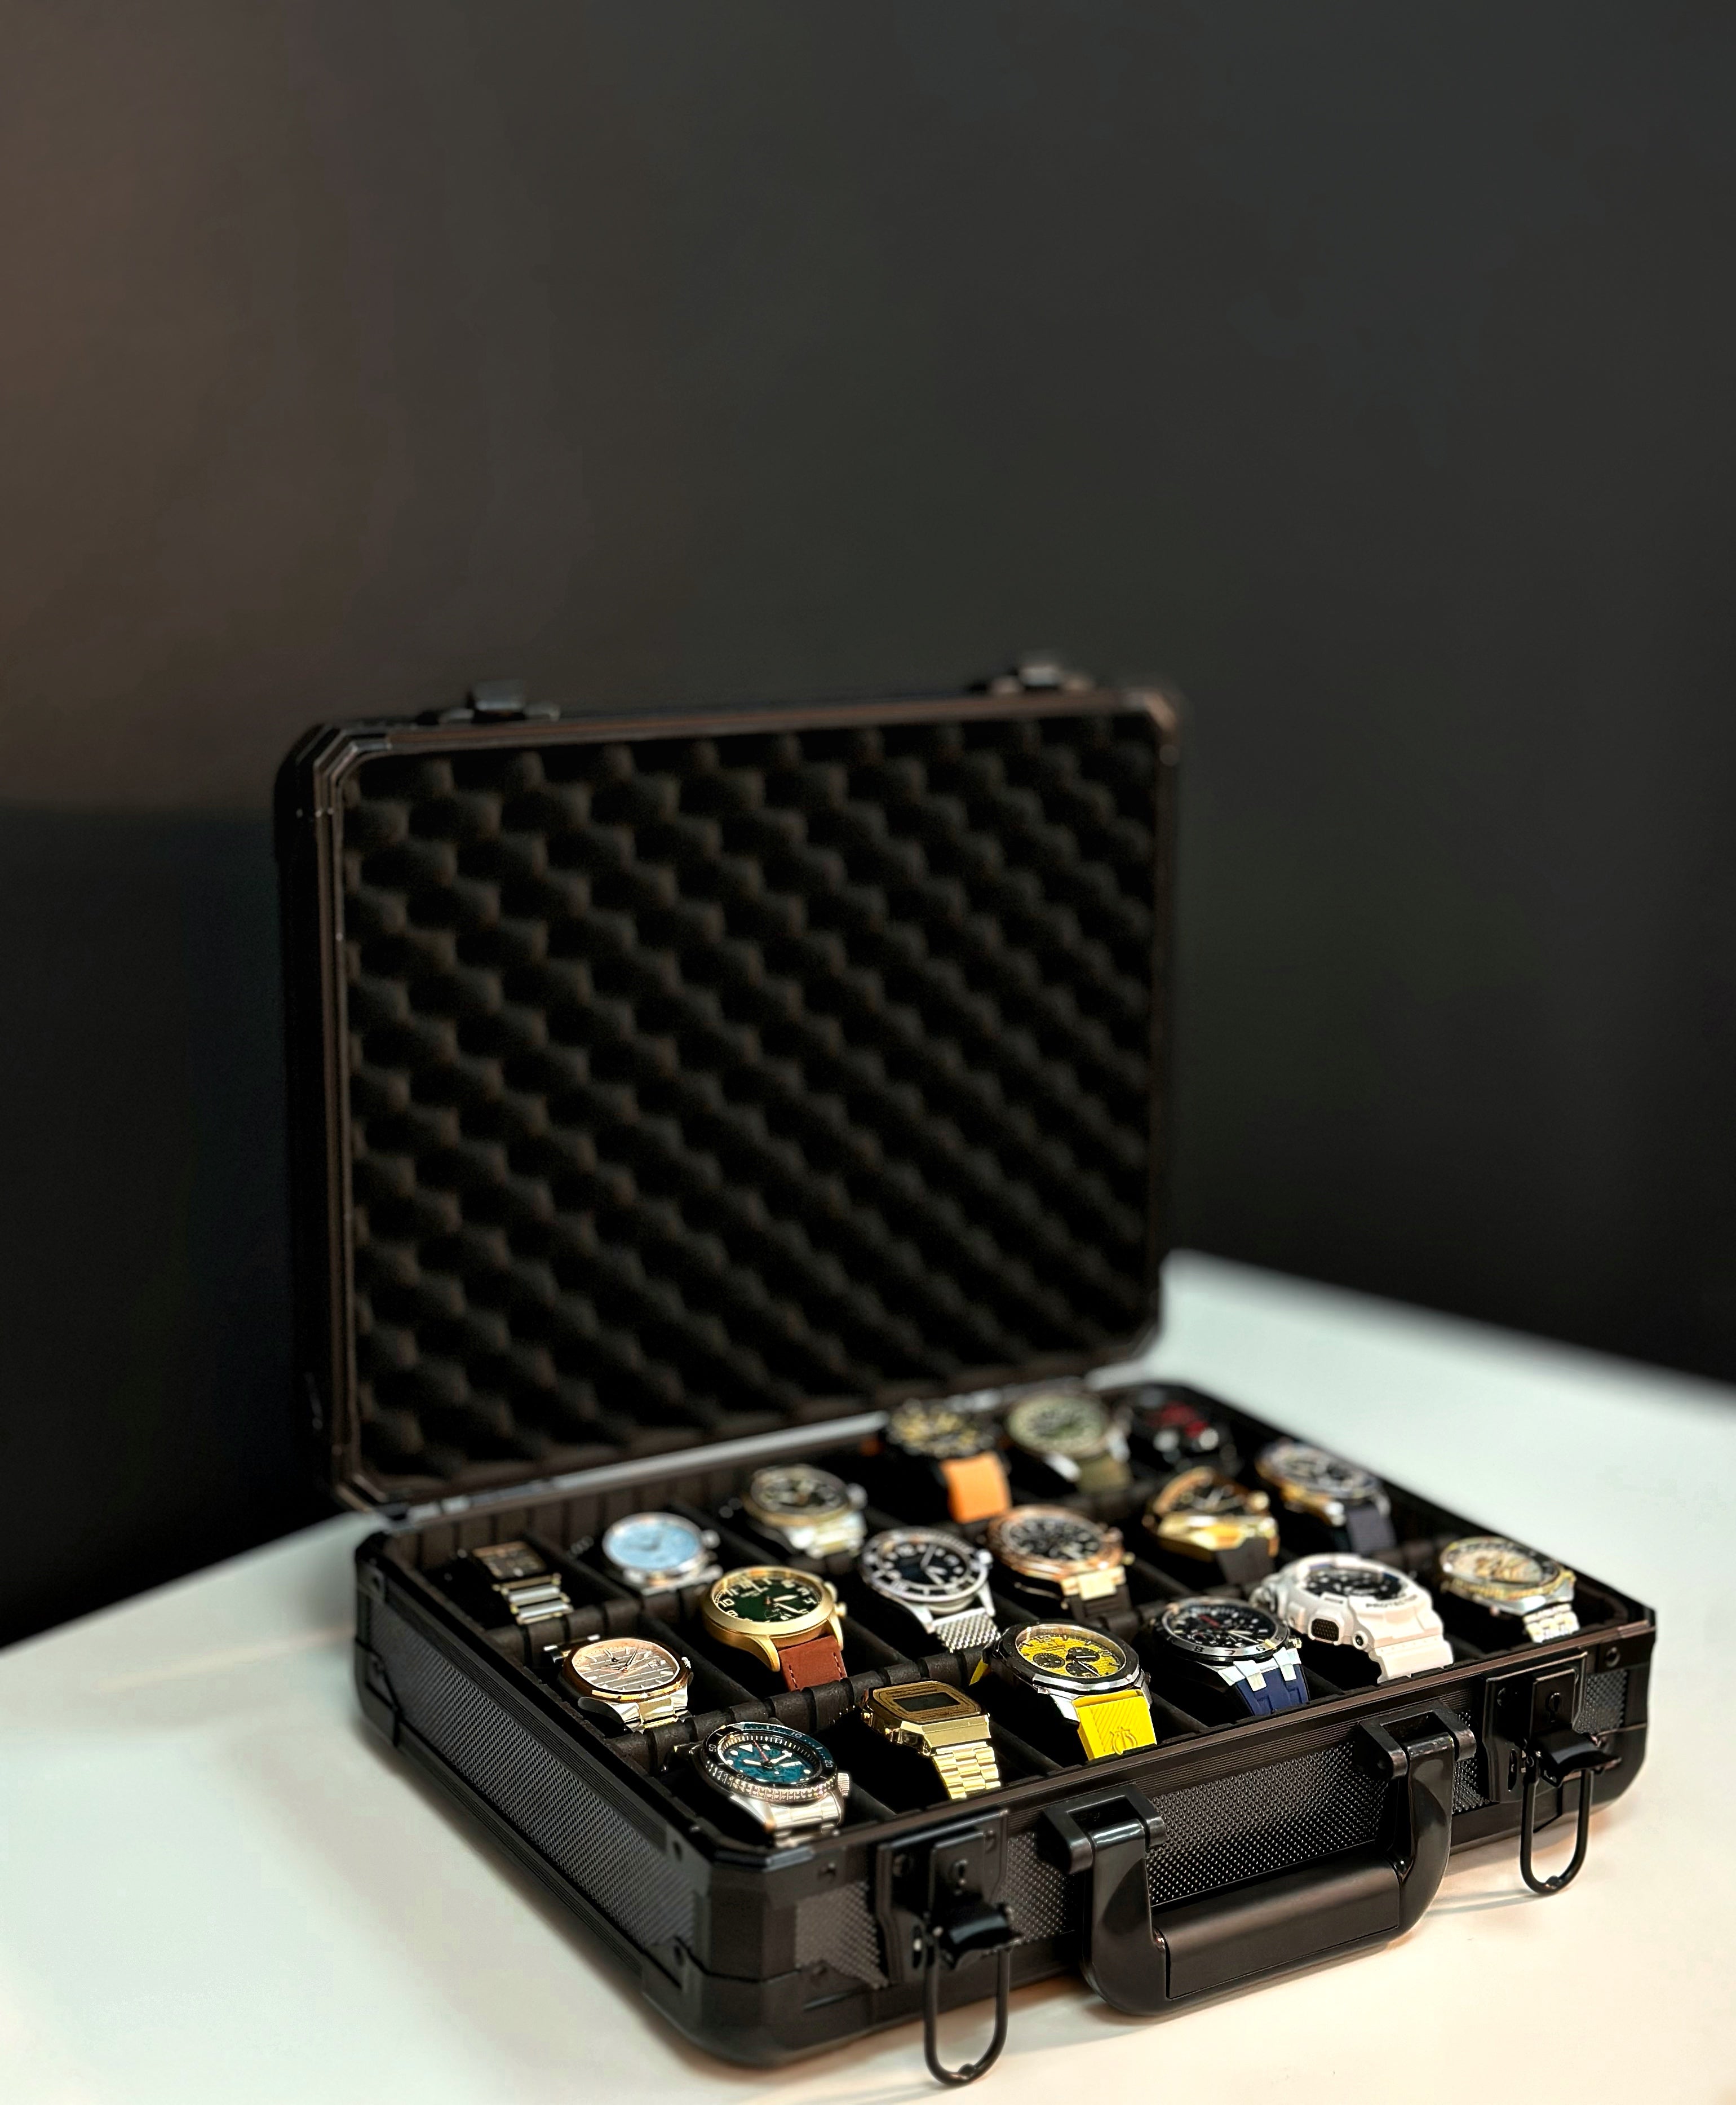 Organized display of watches in a black case